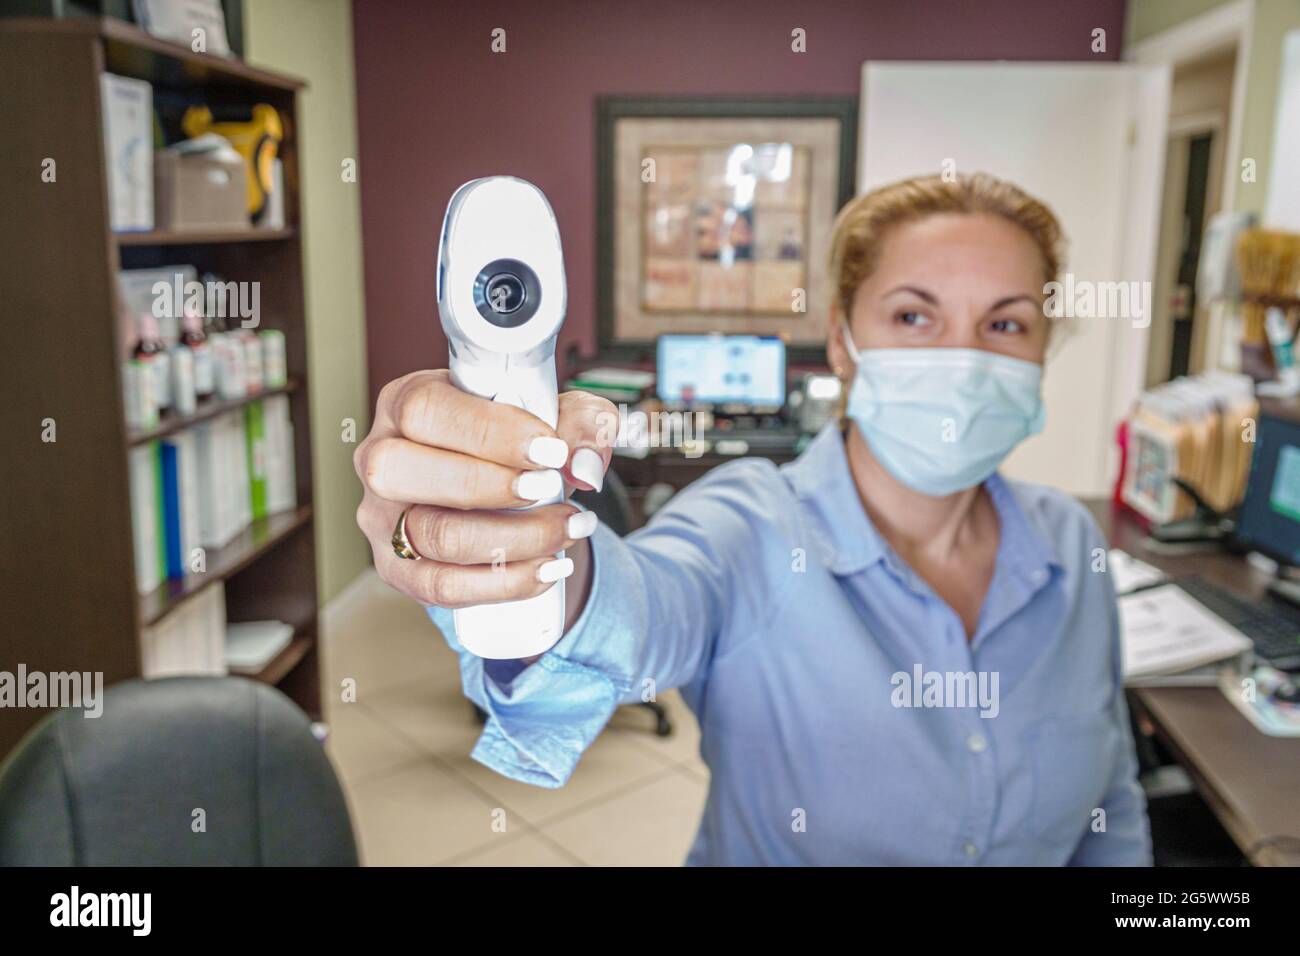 Miami Beach Florida dental office temperature check receptionist Hispanic female Covid-19 pandemic wearing face mask points non-contact IR thermometer Stock Photo